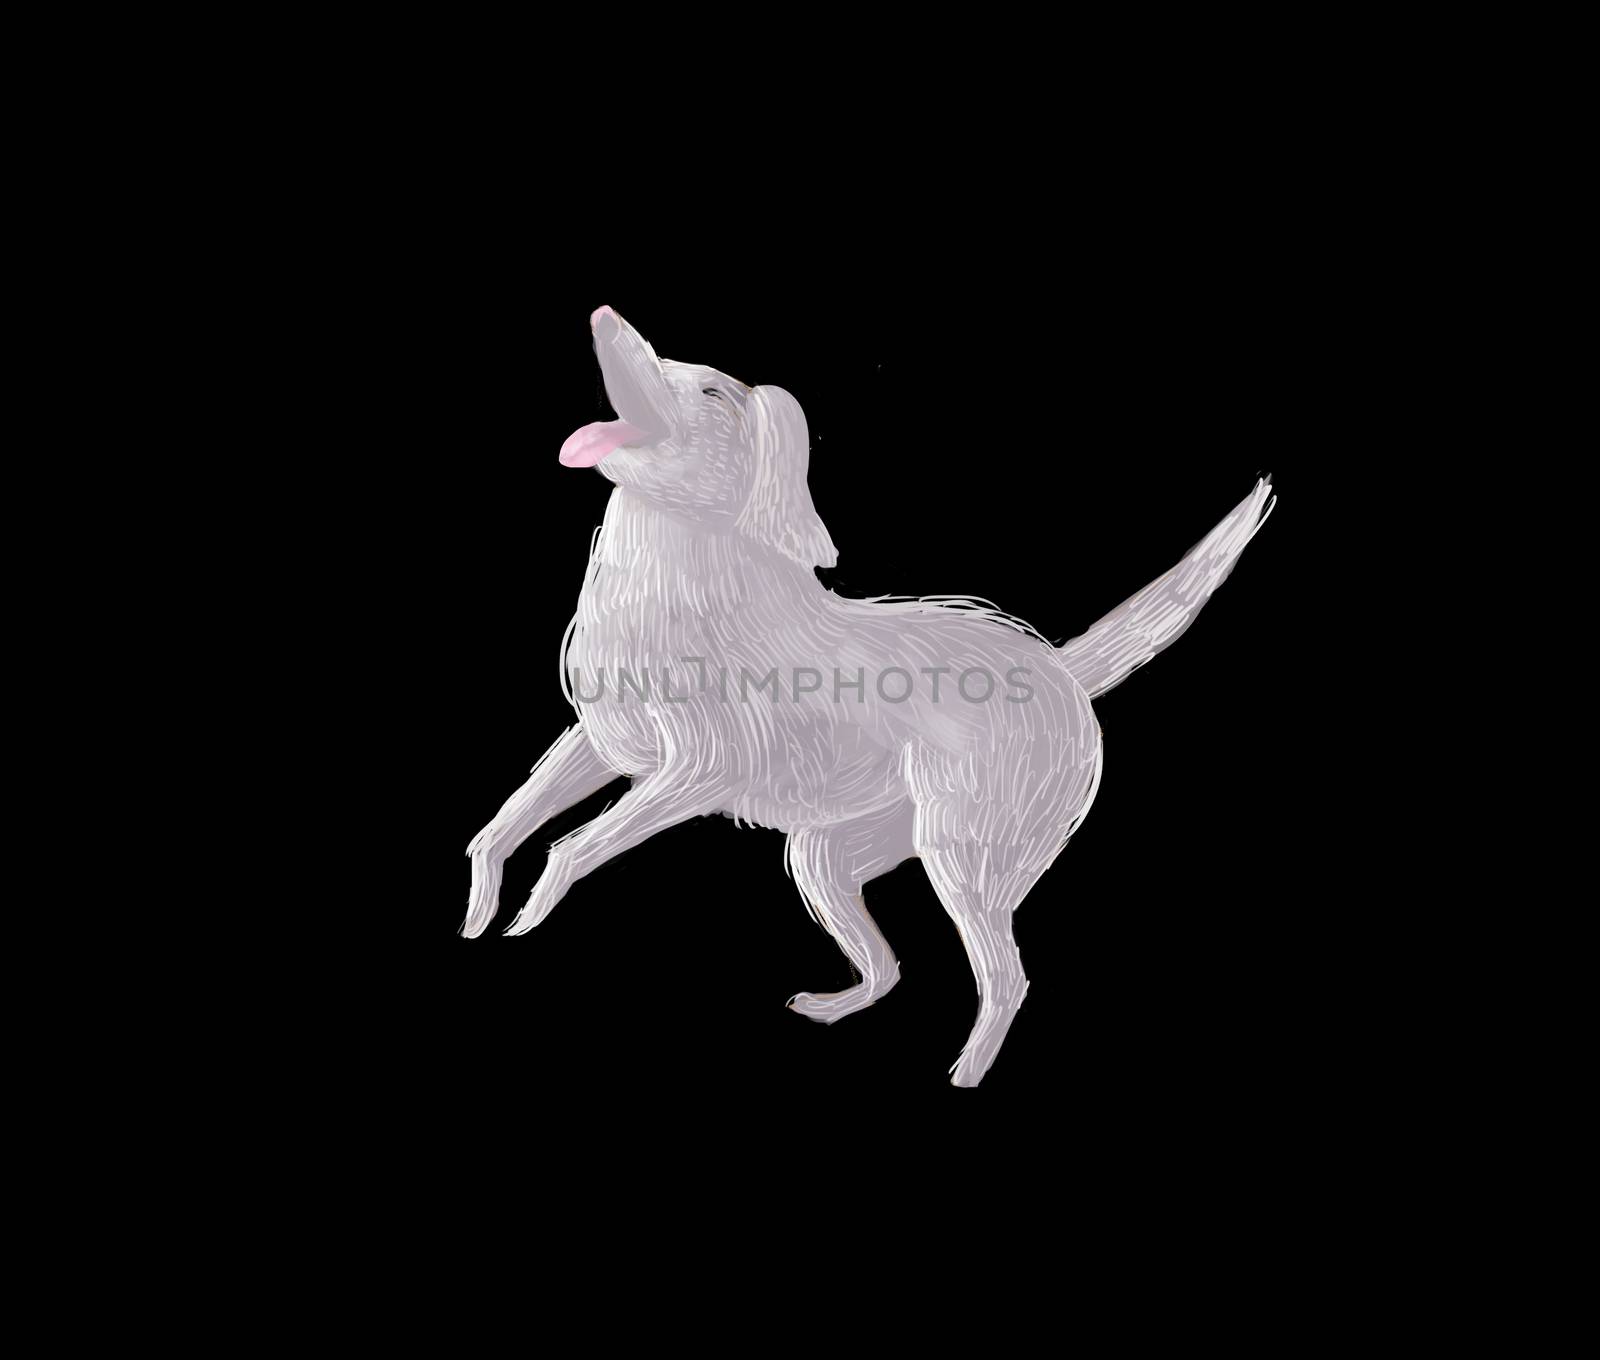 Illustration: The Dog of the Excited Adventure Boy in a black background. Fantastic Realistic Cartoon Style. Creature / Character Leading Role Design.